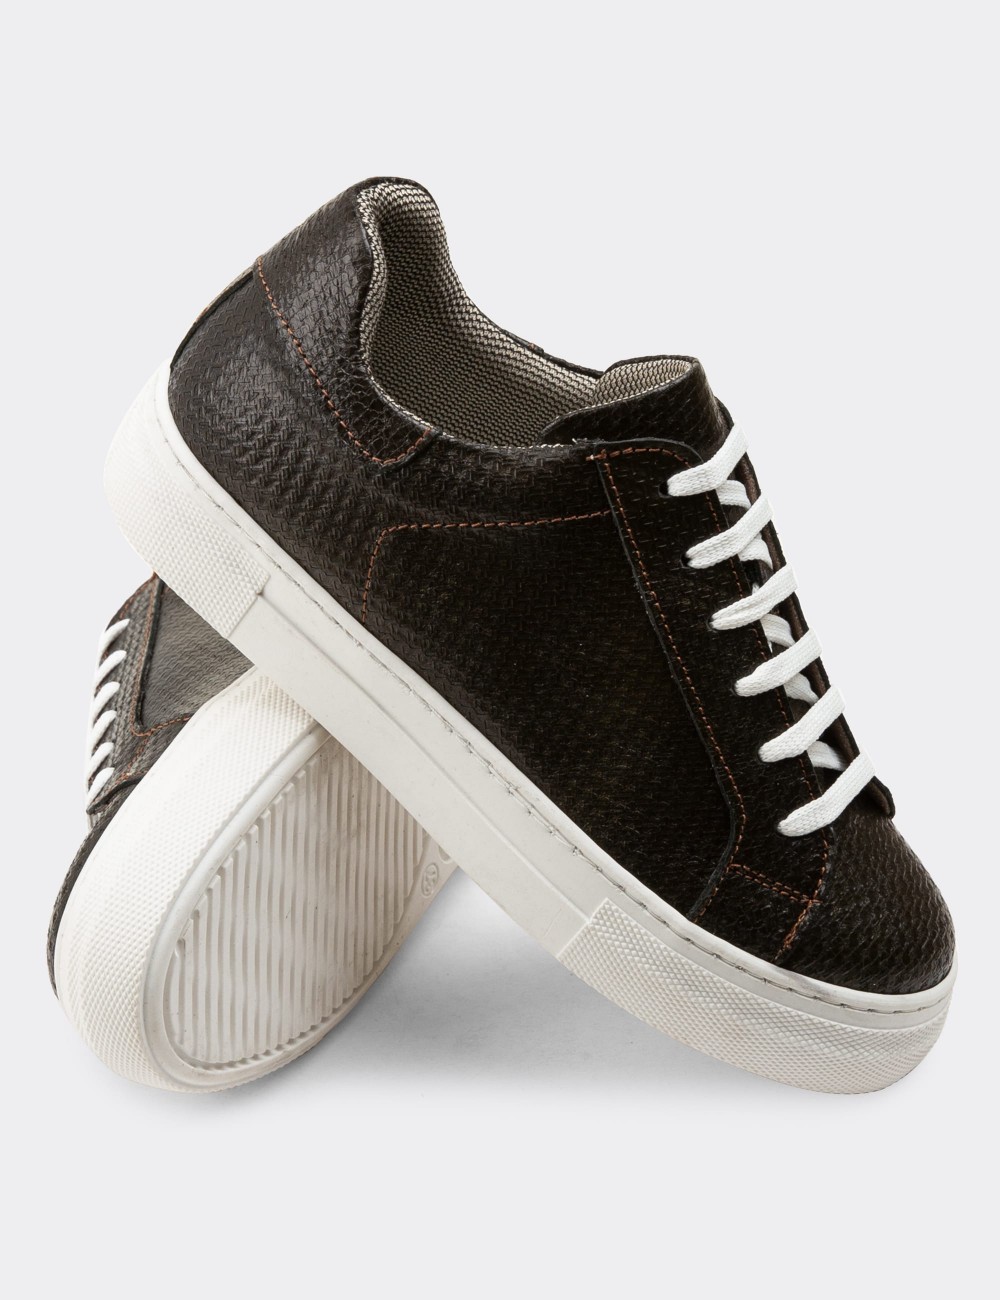 Brown  Leather Sneakers - Z1681ZKHVC17